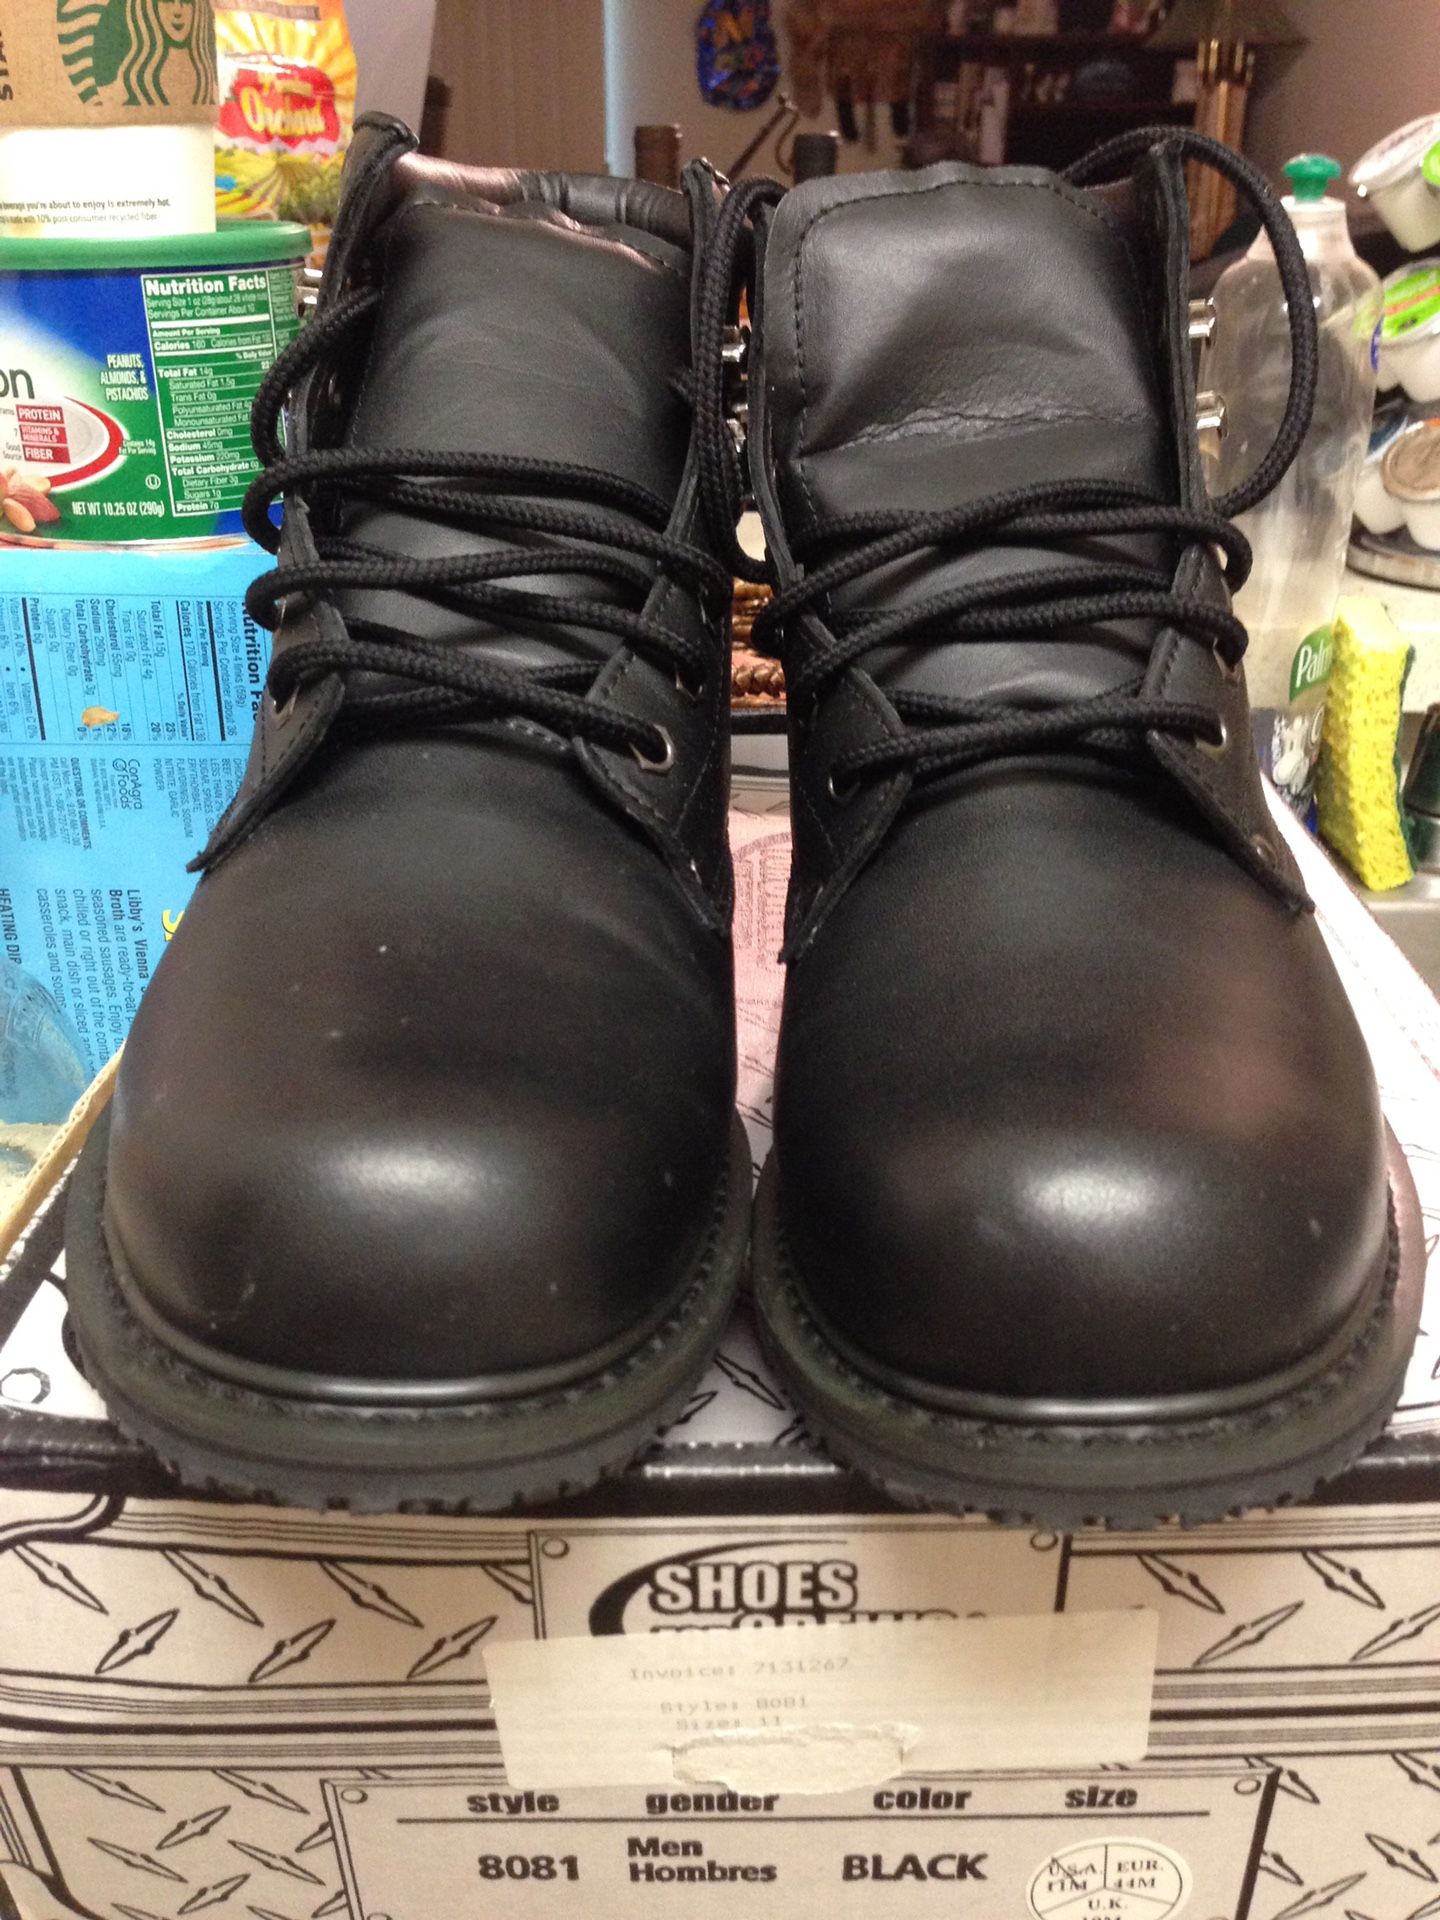 Leather work boots. Water resistant $40